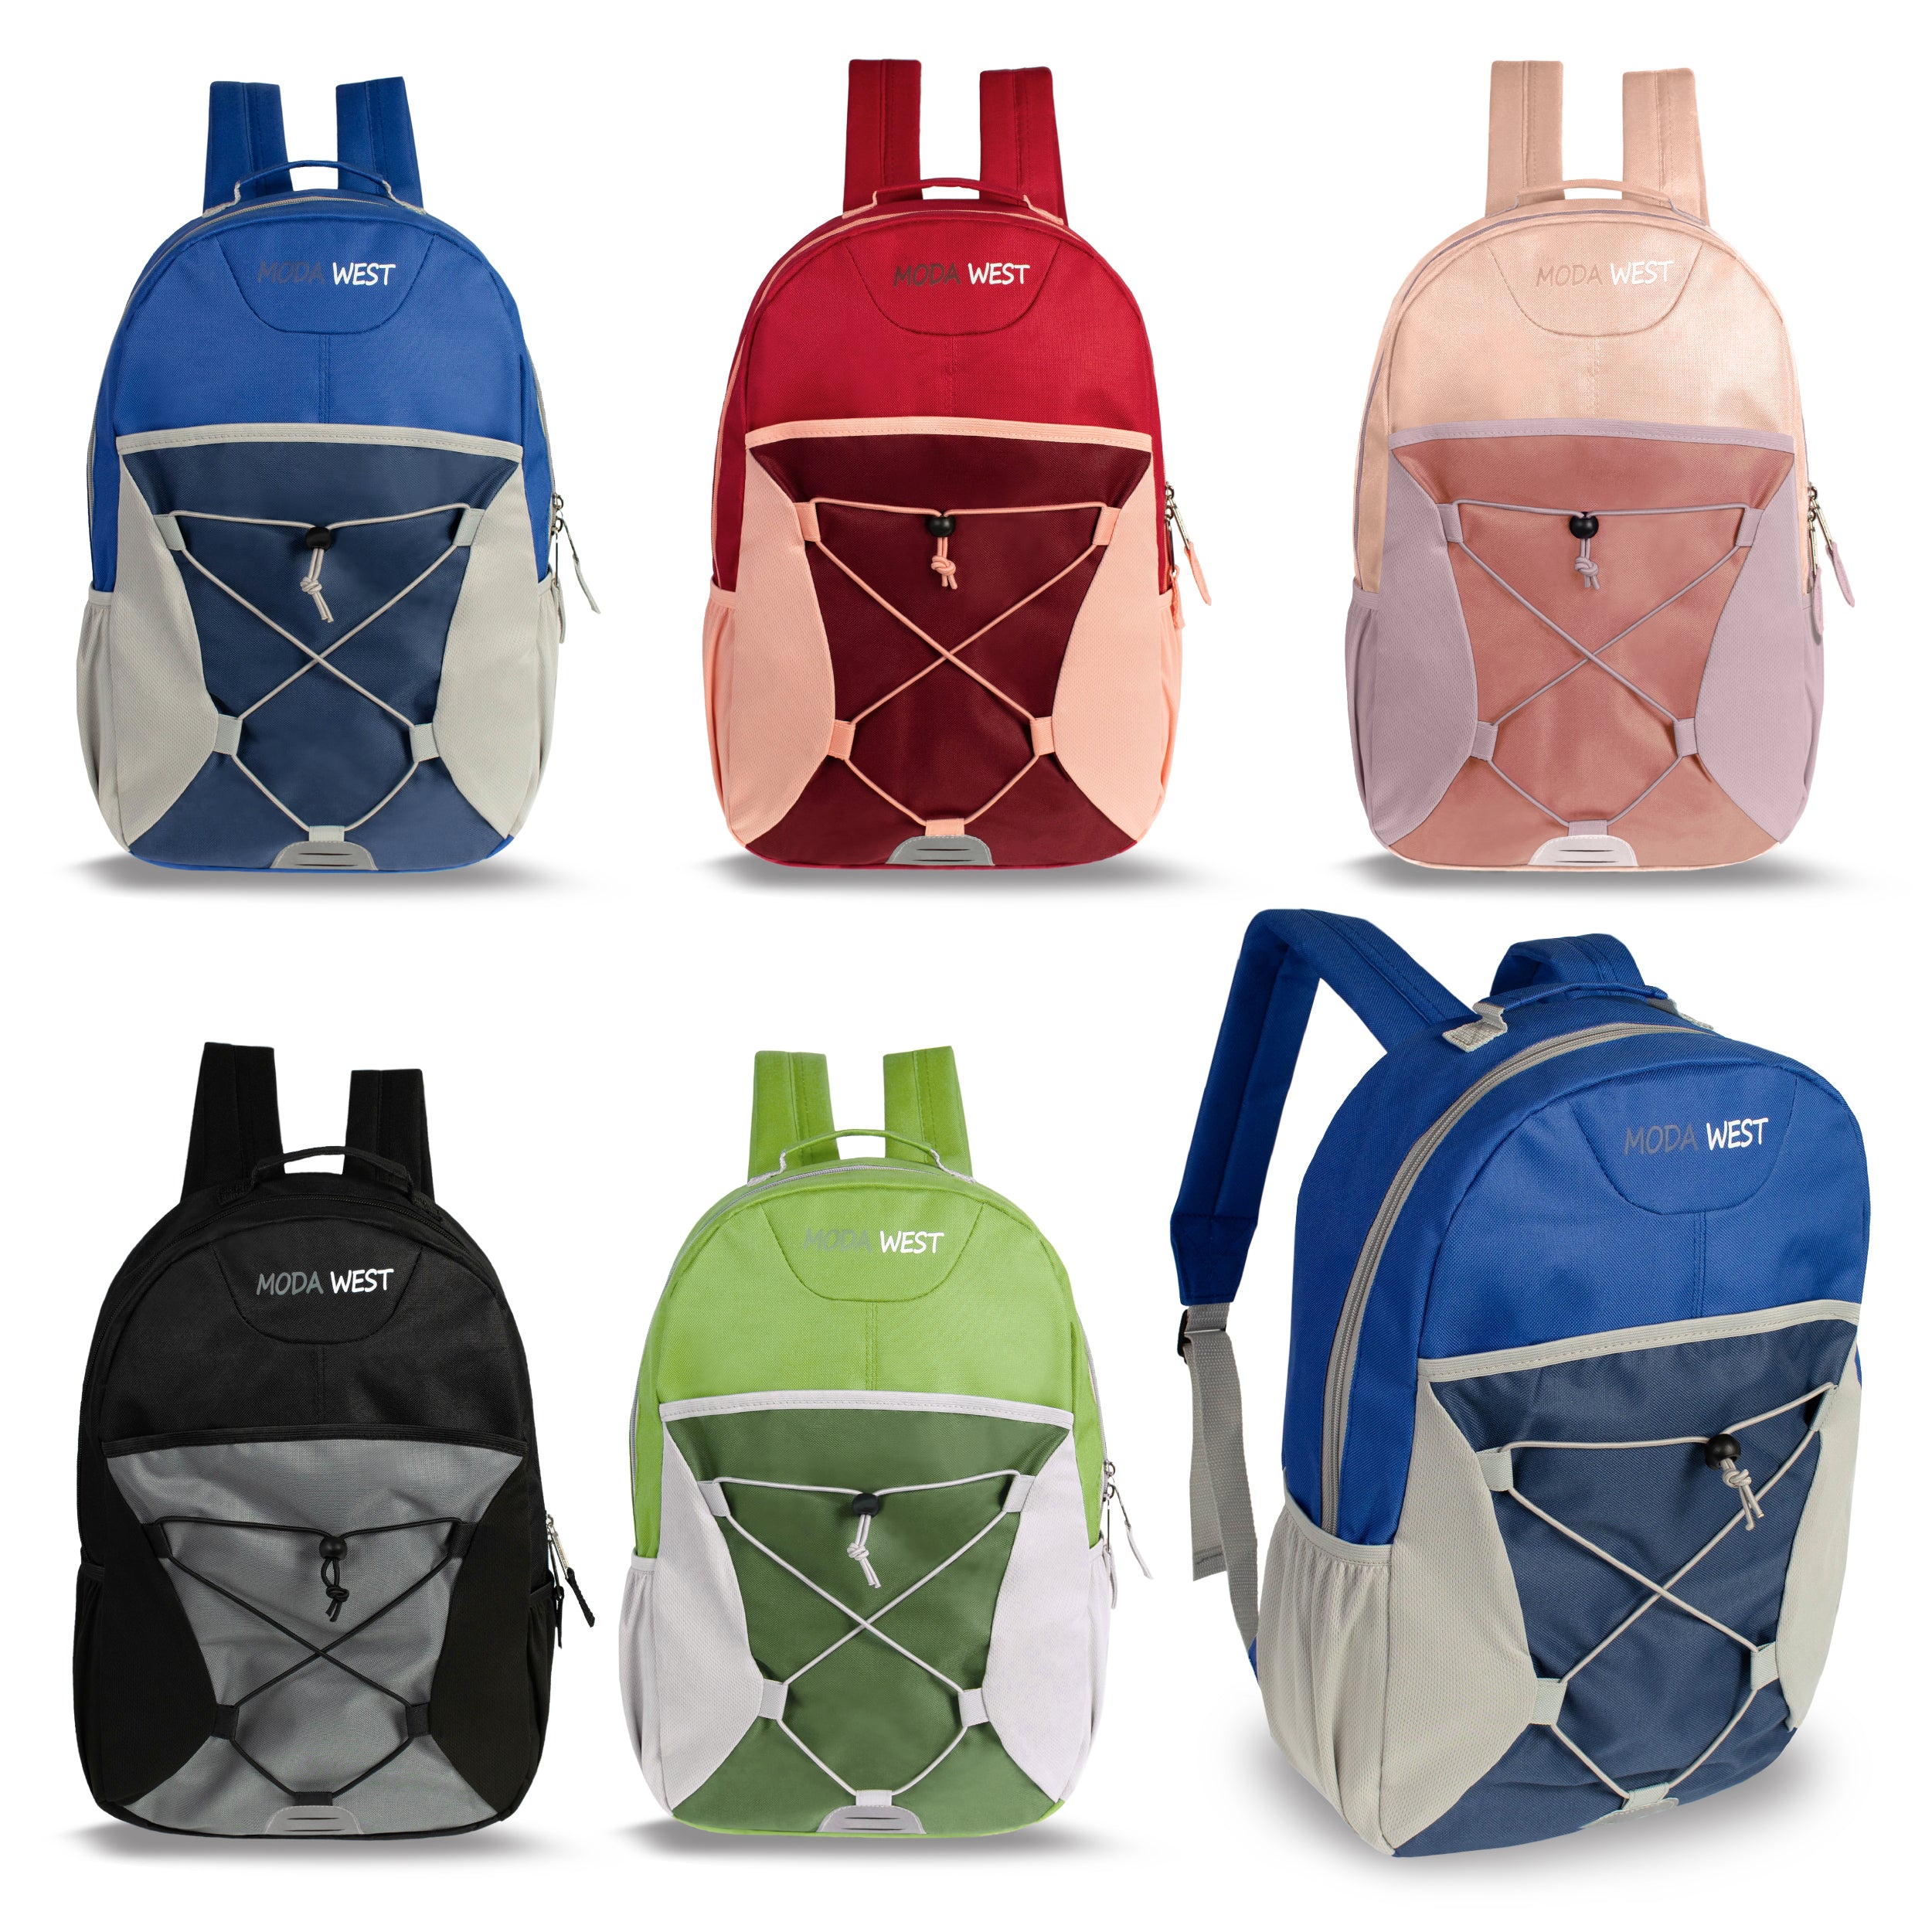 17" Bungee Bulk Backpacks in 5 Assorted Colors - Wholesale Case of 24 Bookbags